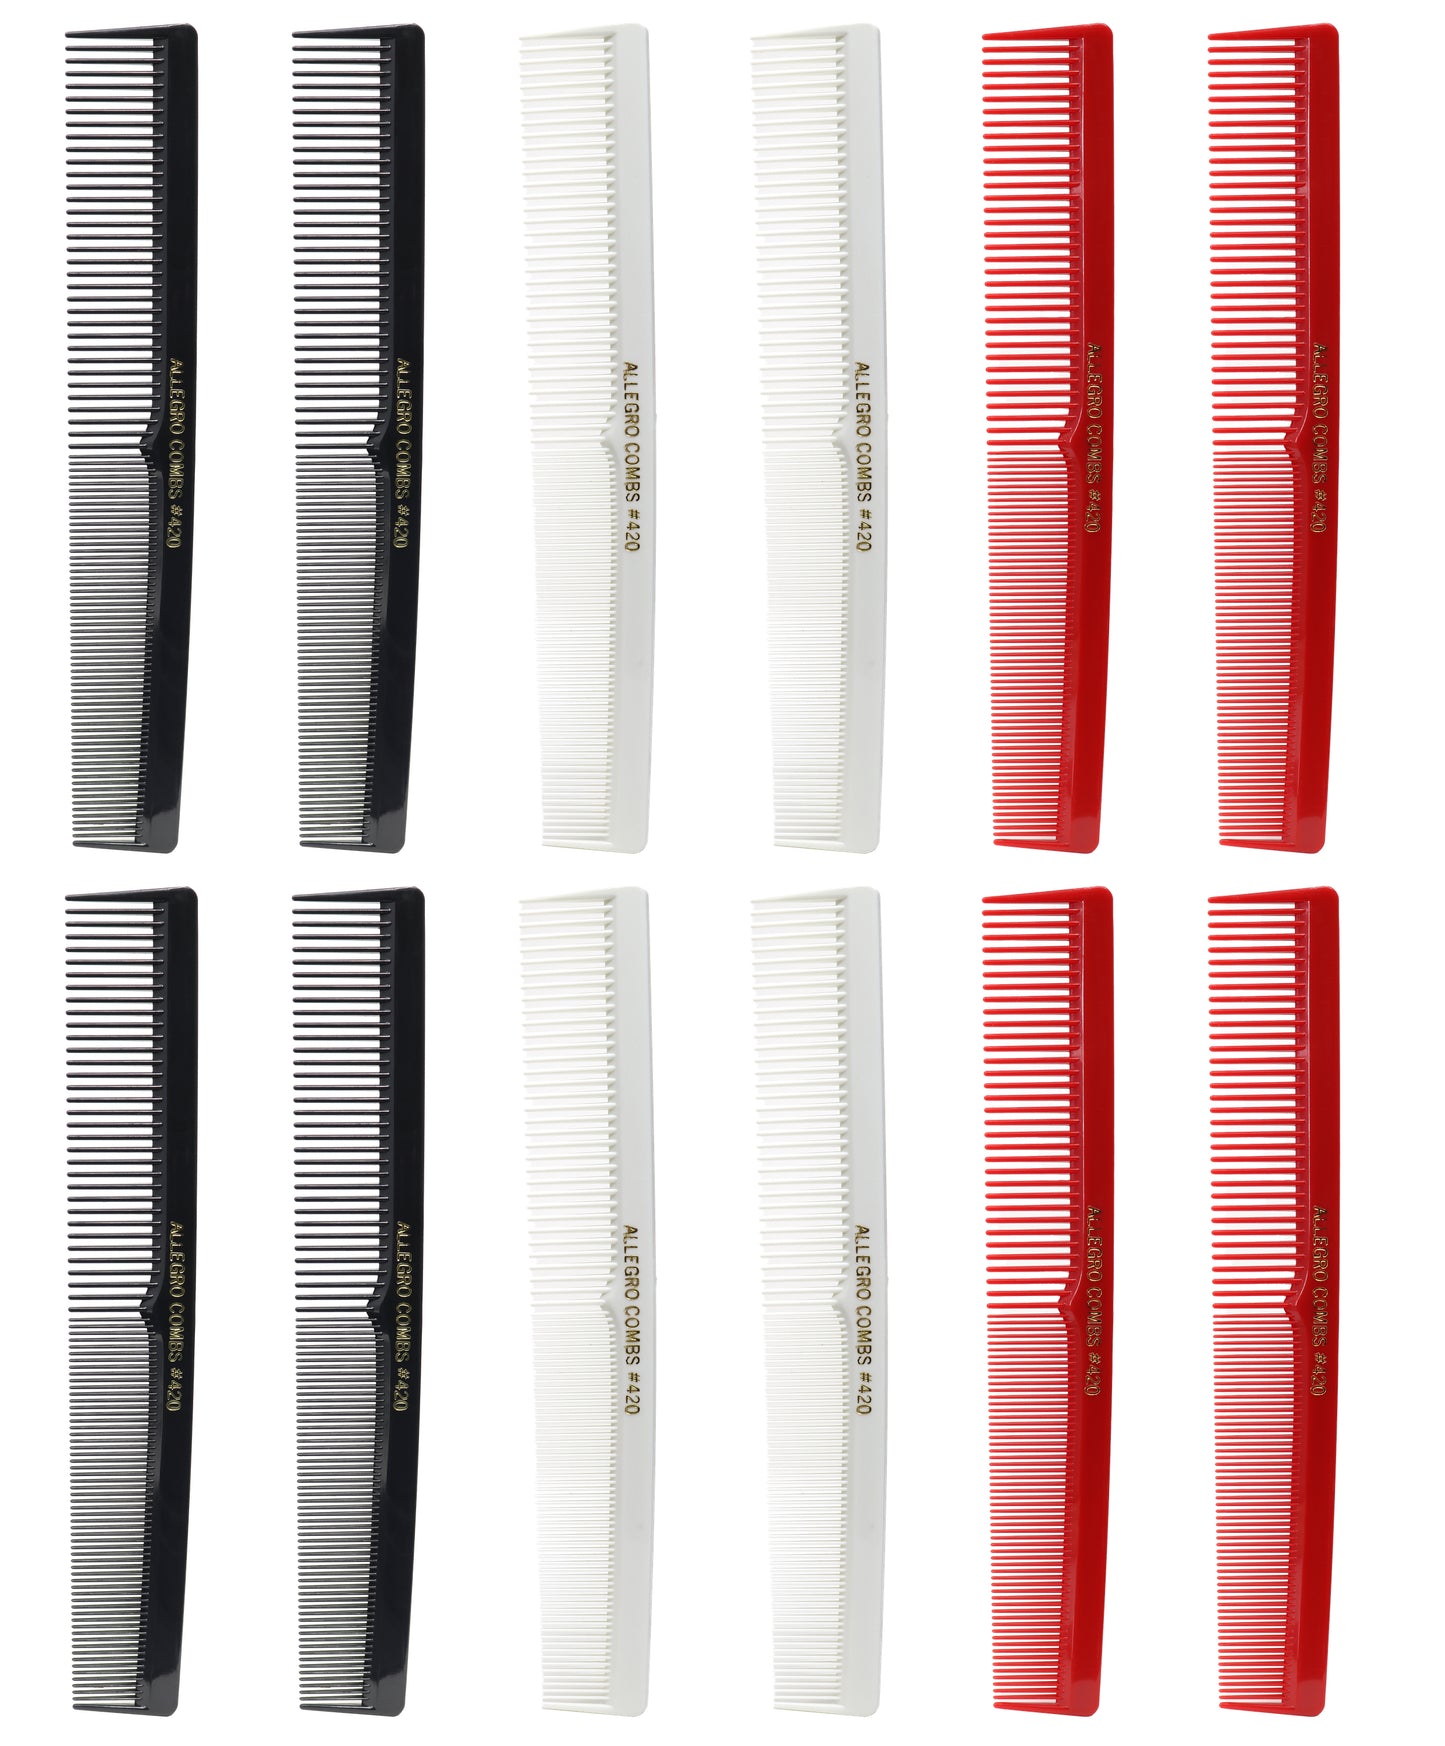 Allegro Combs 420 Barber Comb Comb Set Hair Cutting Combs Pocket Comb Combs for Hair Stylist Styling Comb 12 pk.